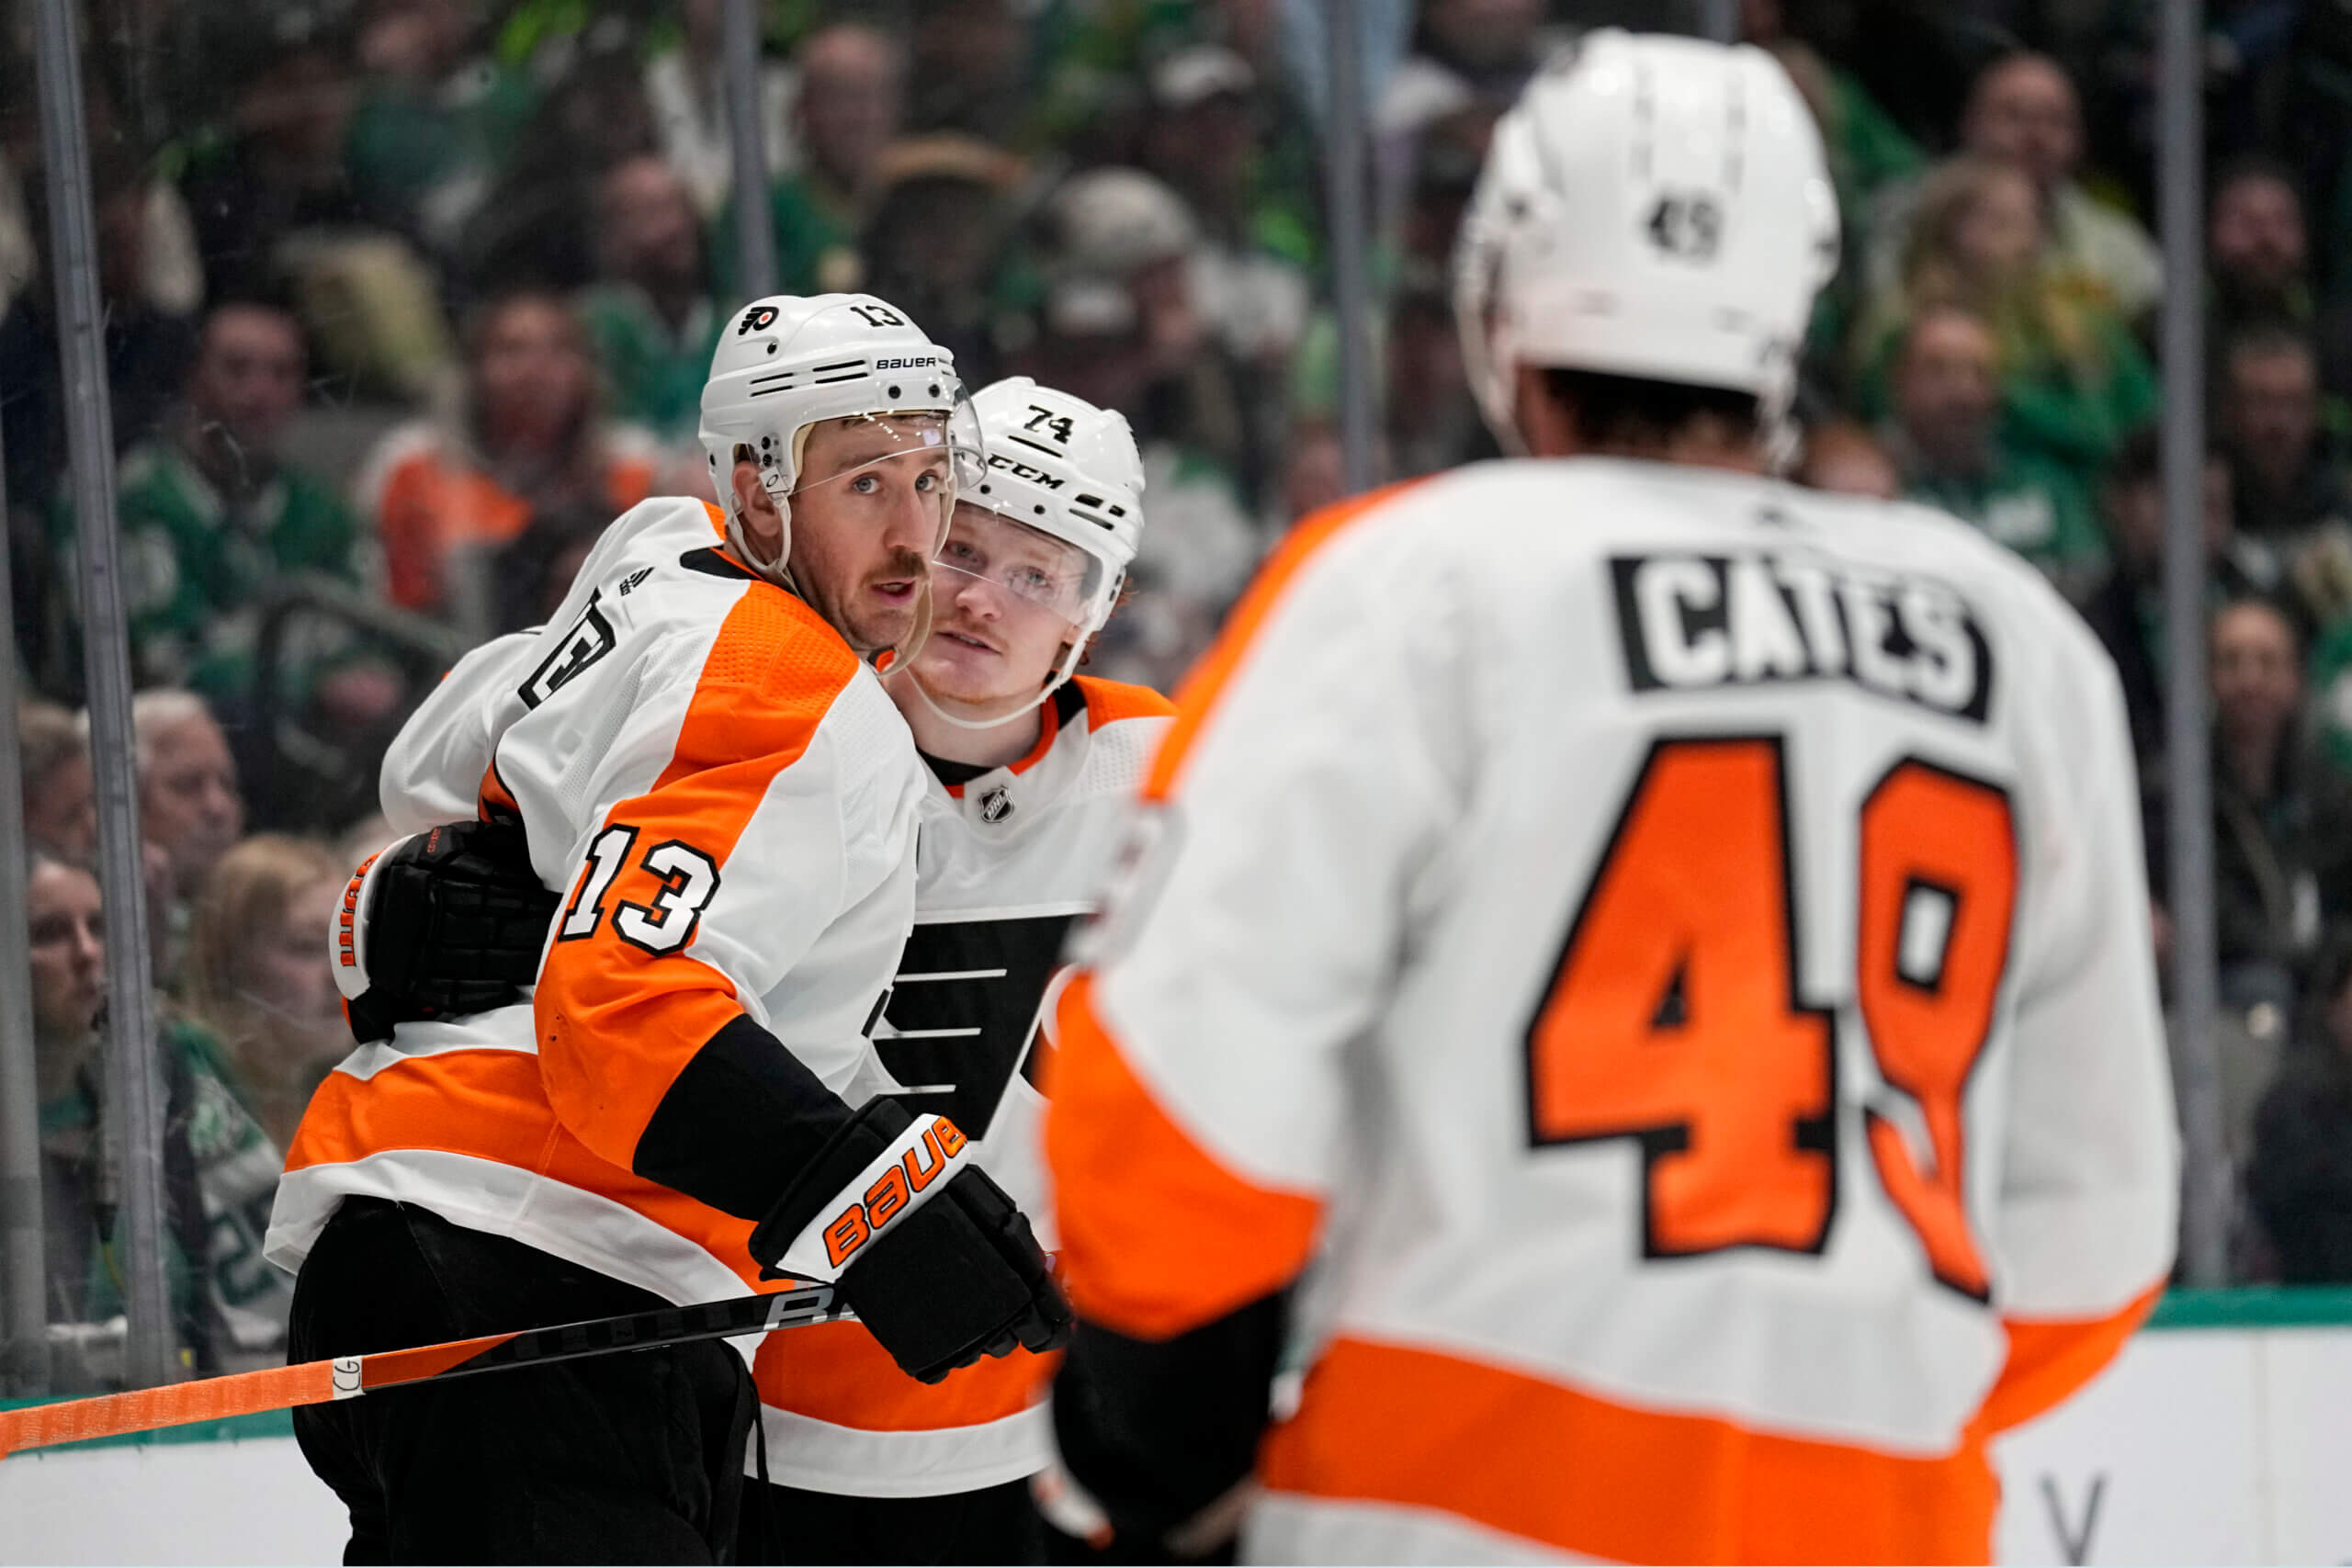 Flyers win fourth straight, Kevin Hayes gets All-Star nod, Travis